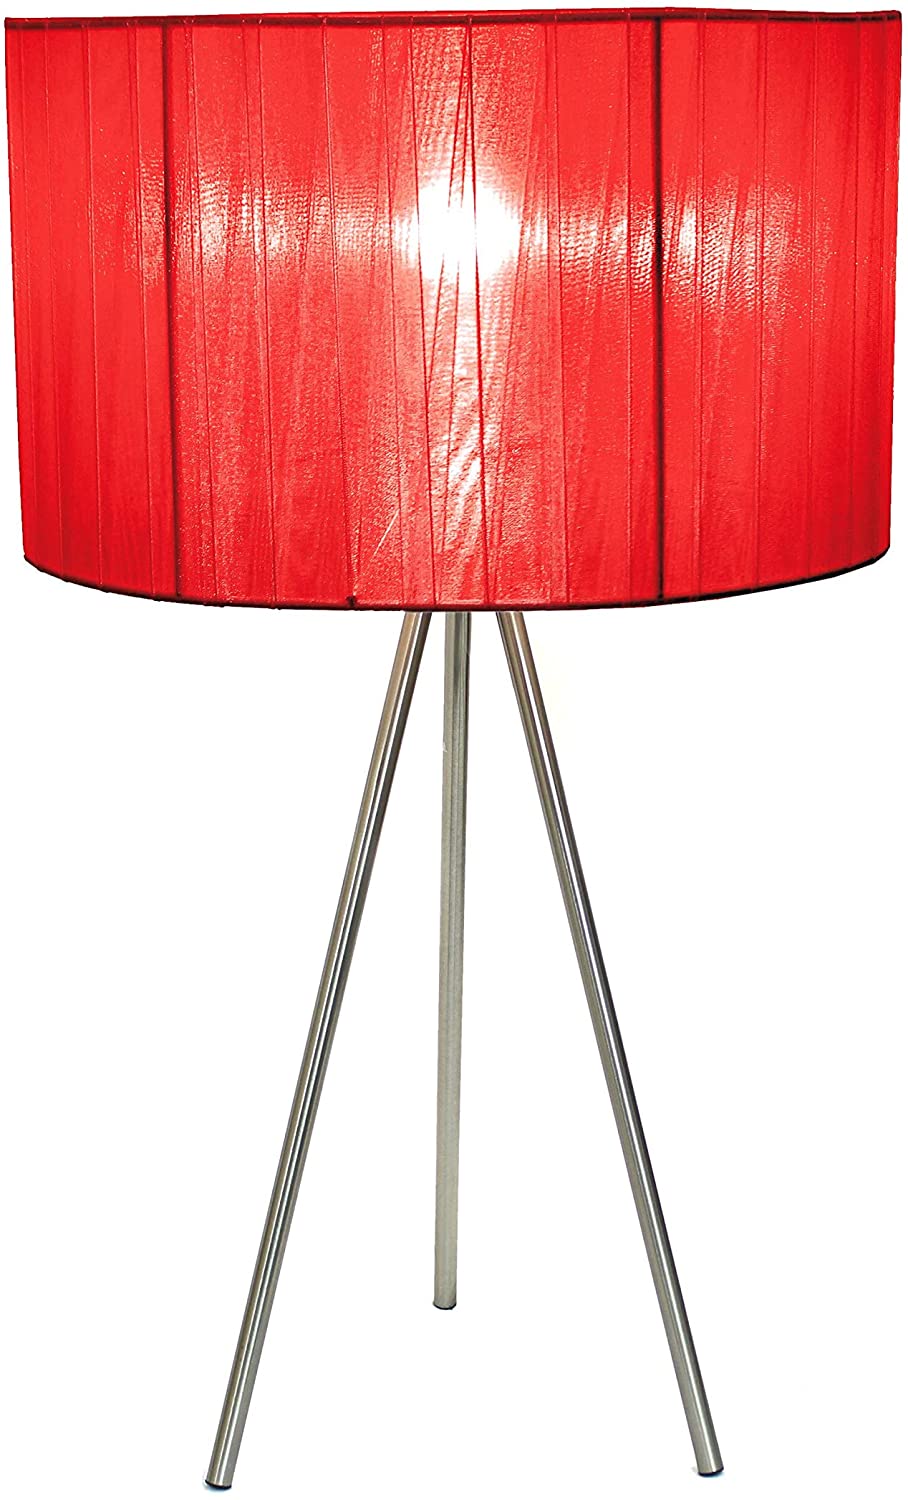 Unknown1 Brushed Nickel Tripod Table Lamp Pleated Silk Sheer Shade Red Modern Contemporary